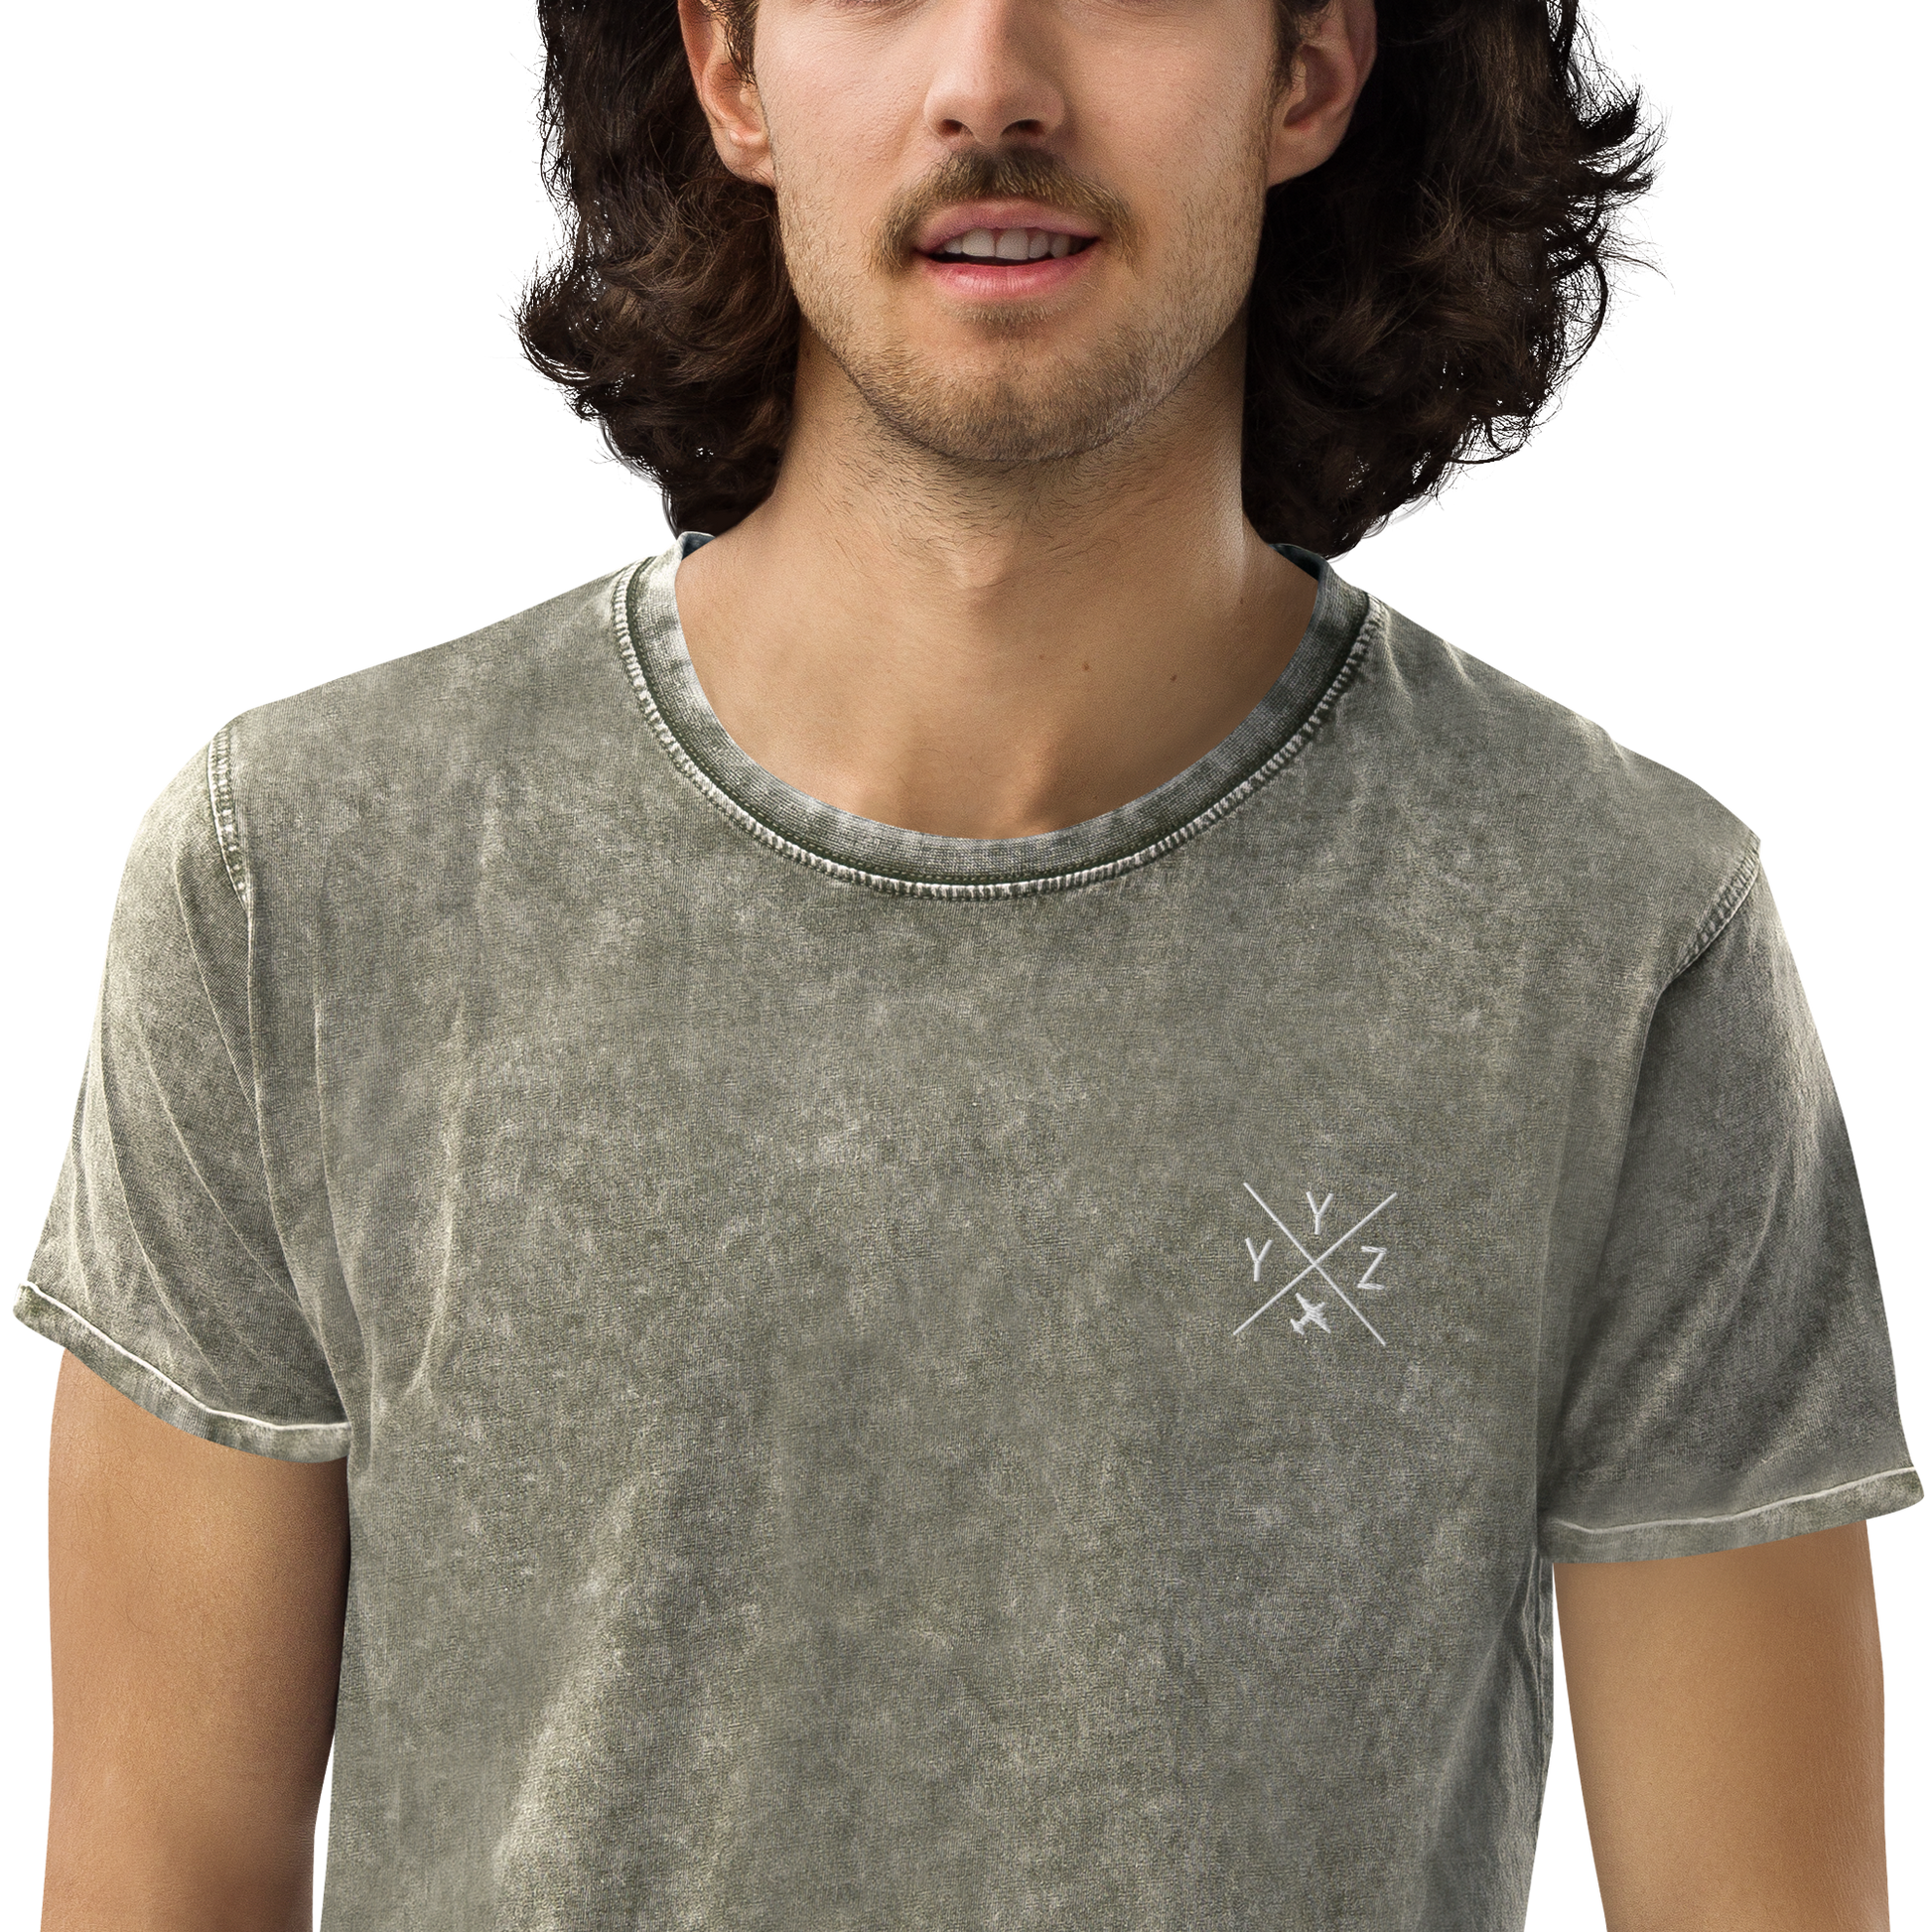 YHM Designs - YYZ Toronto Denim T-Shirt - Crossed-X Design with Airport Code and Vintage Propliner - White Embroidery - Image 11